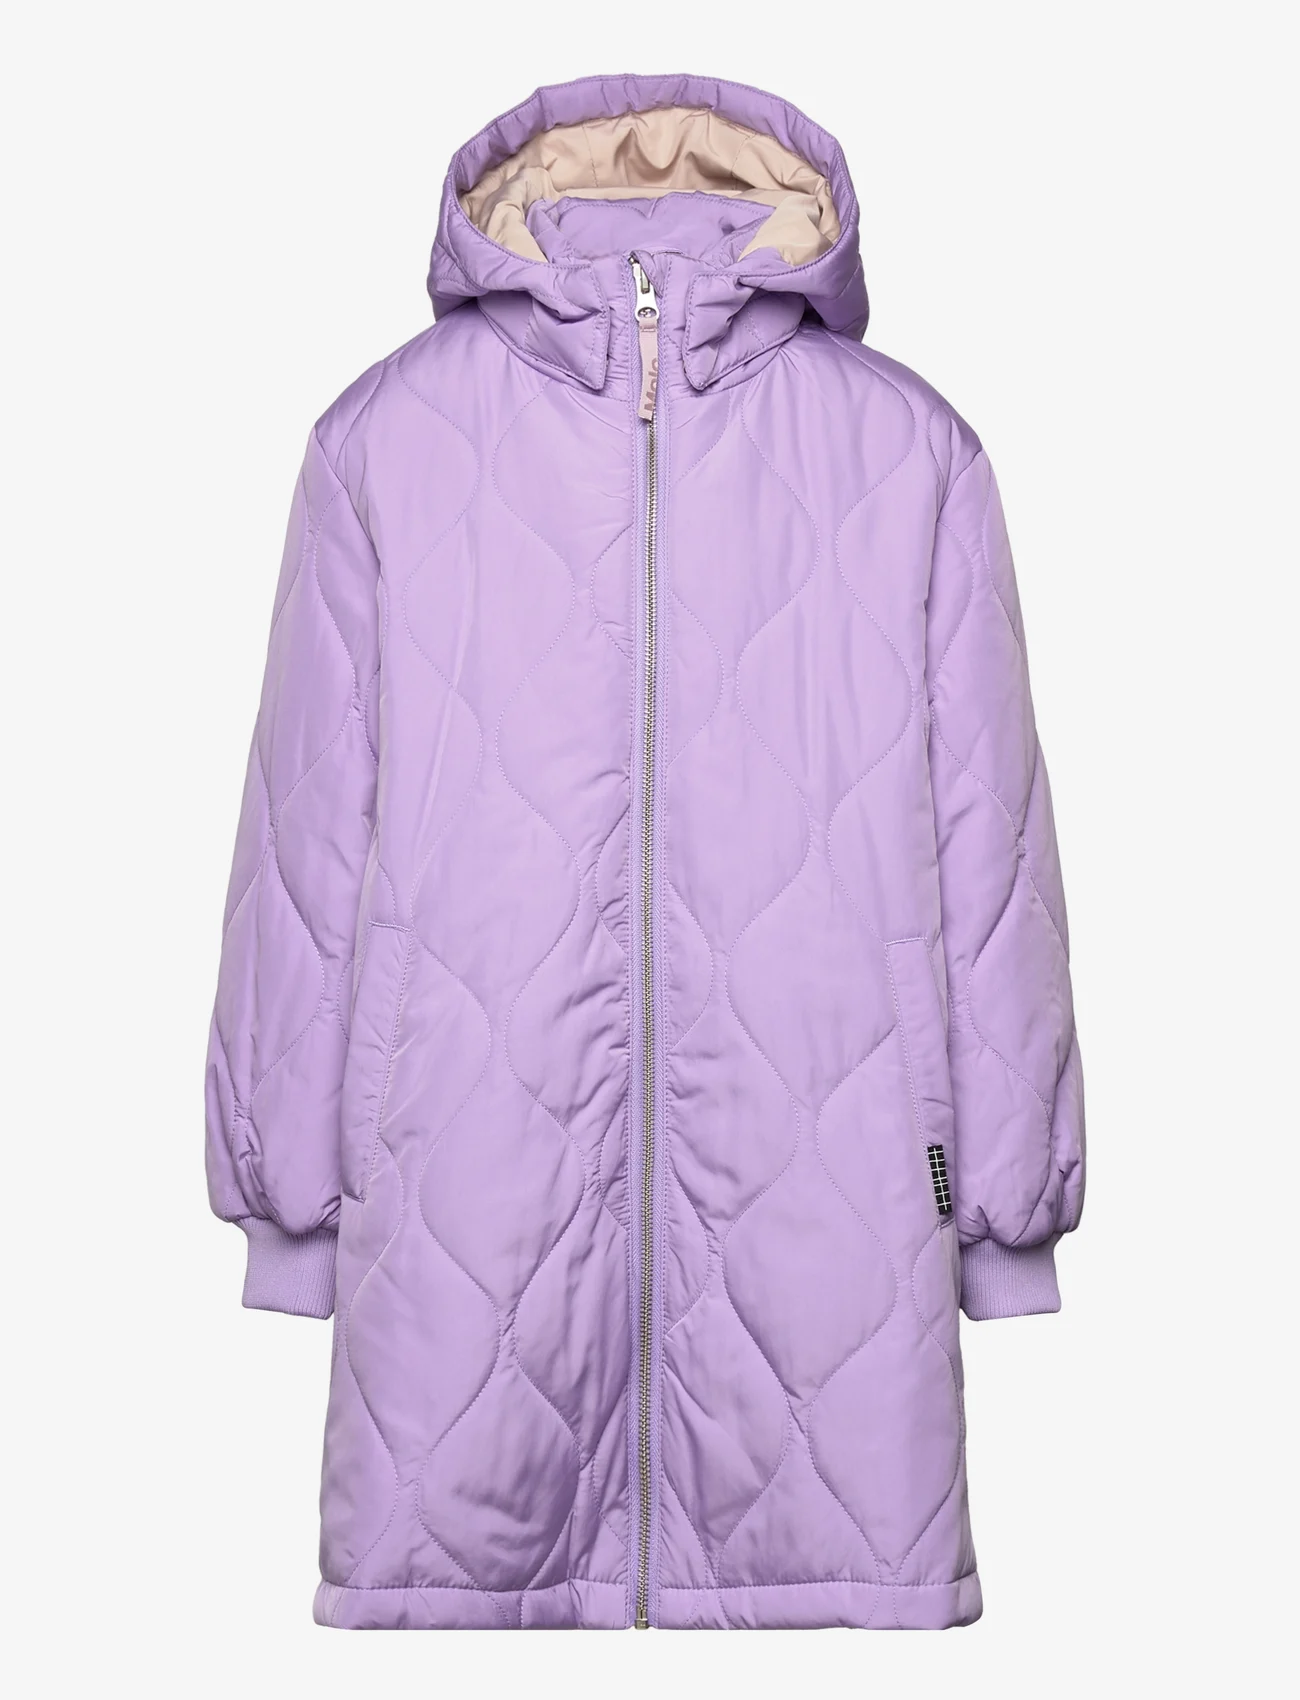 Molo - Hannah - quilted jackets - violet sky - 0